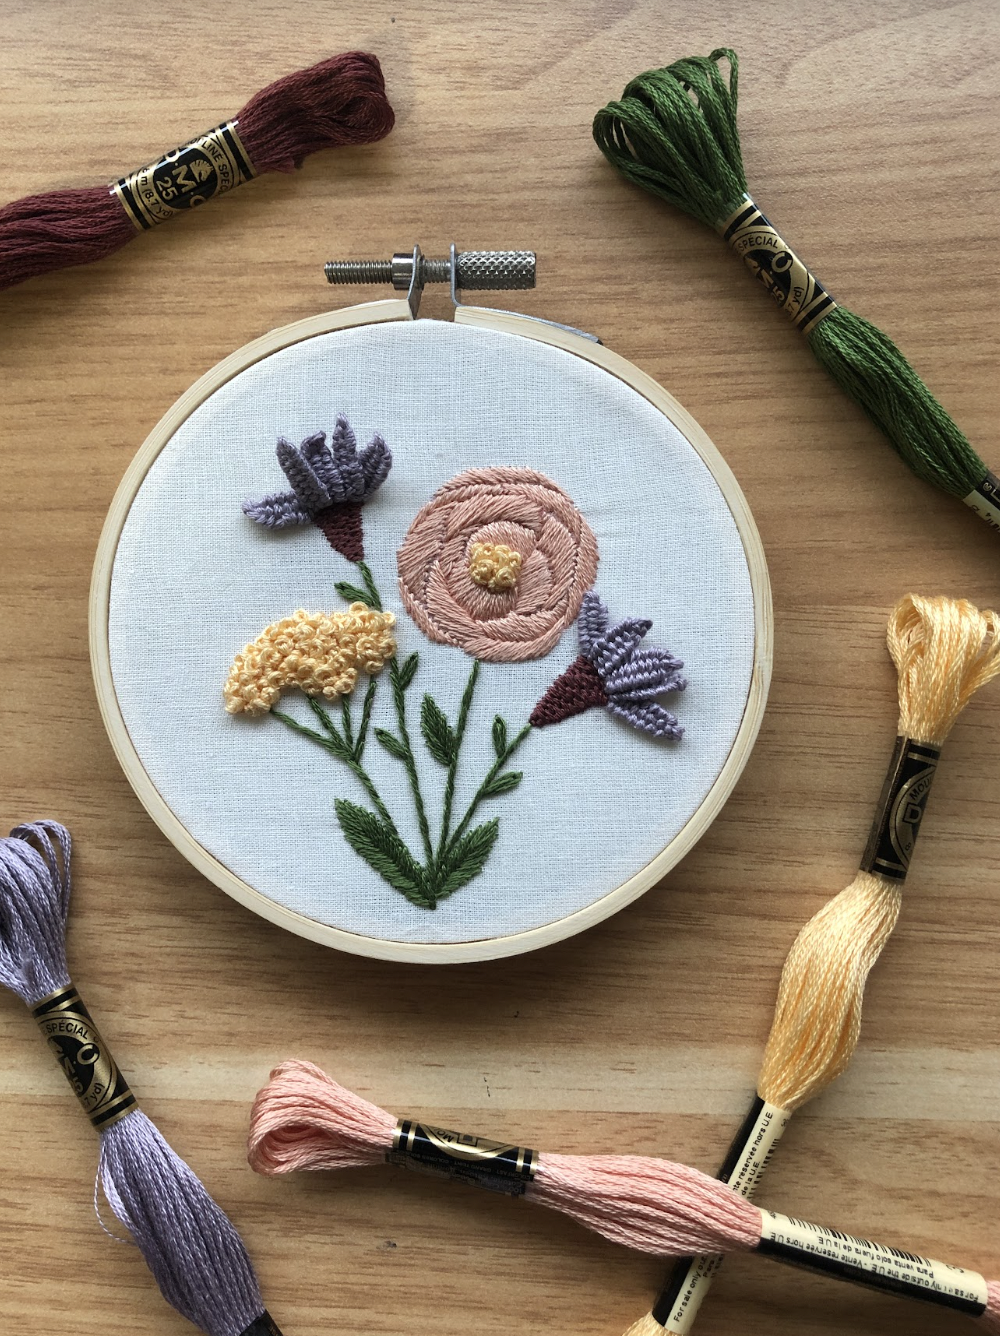 EMBROIDERY CLASS: Blooming Wildflowers